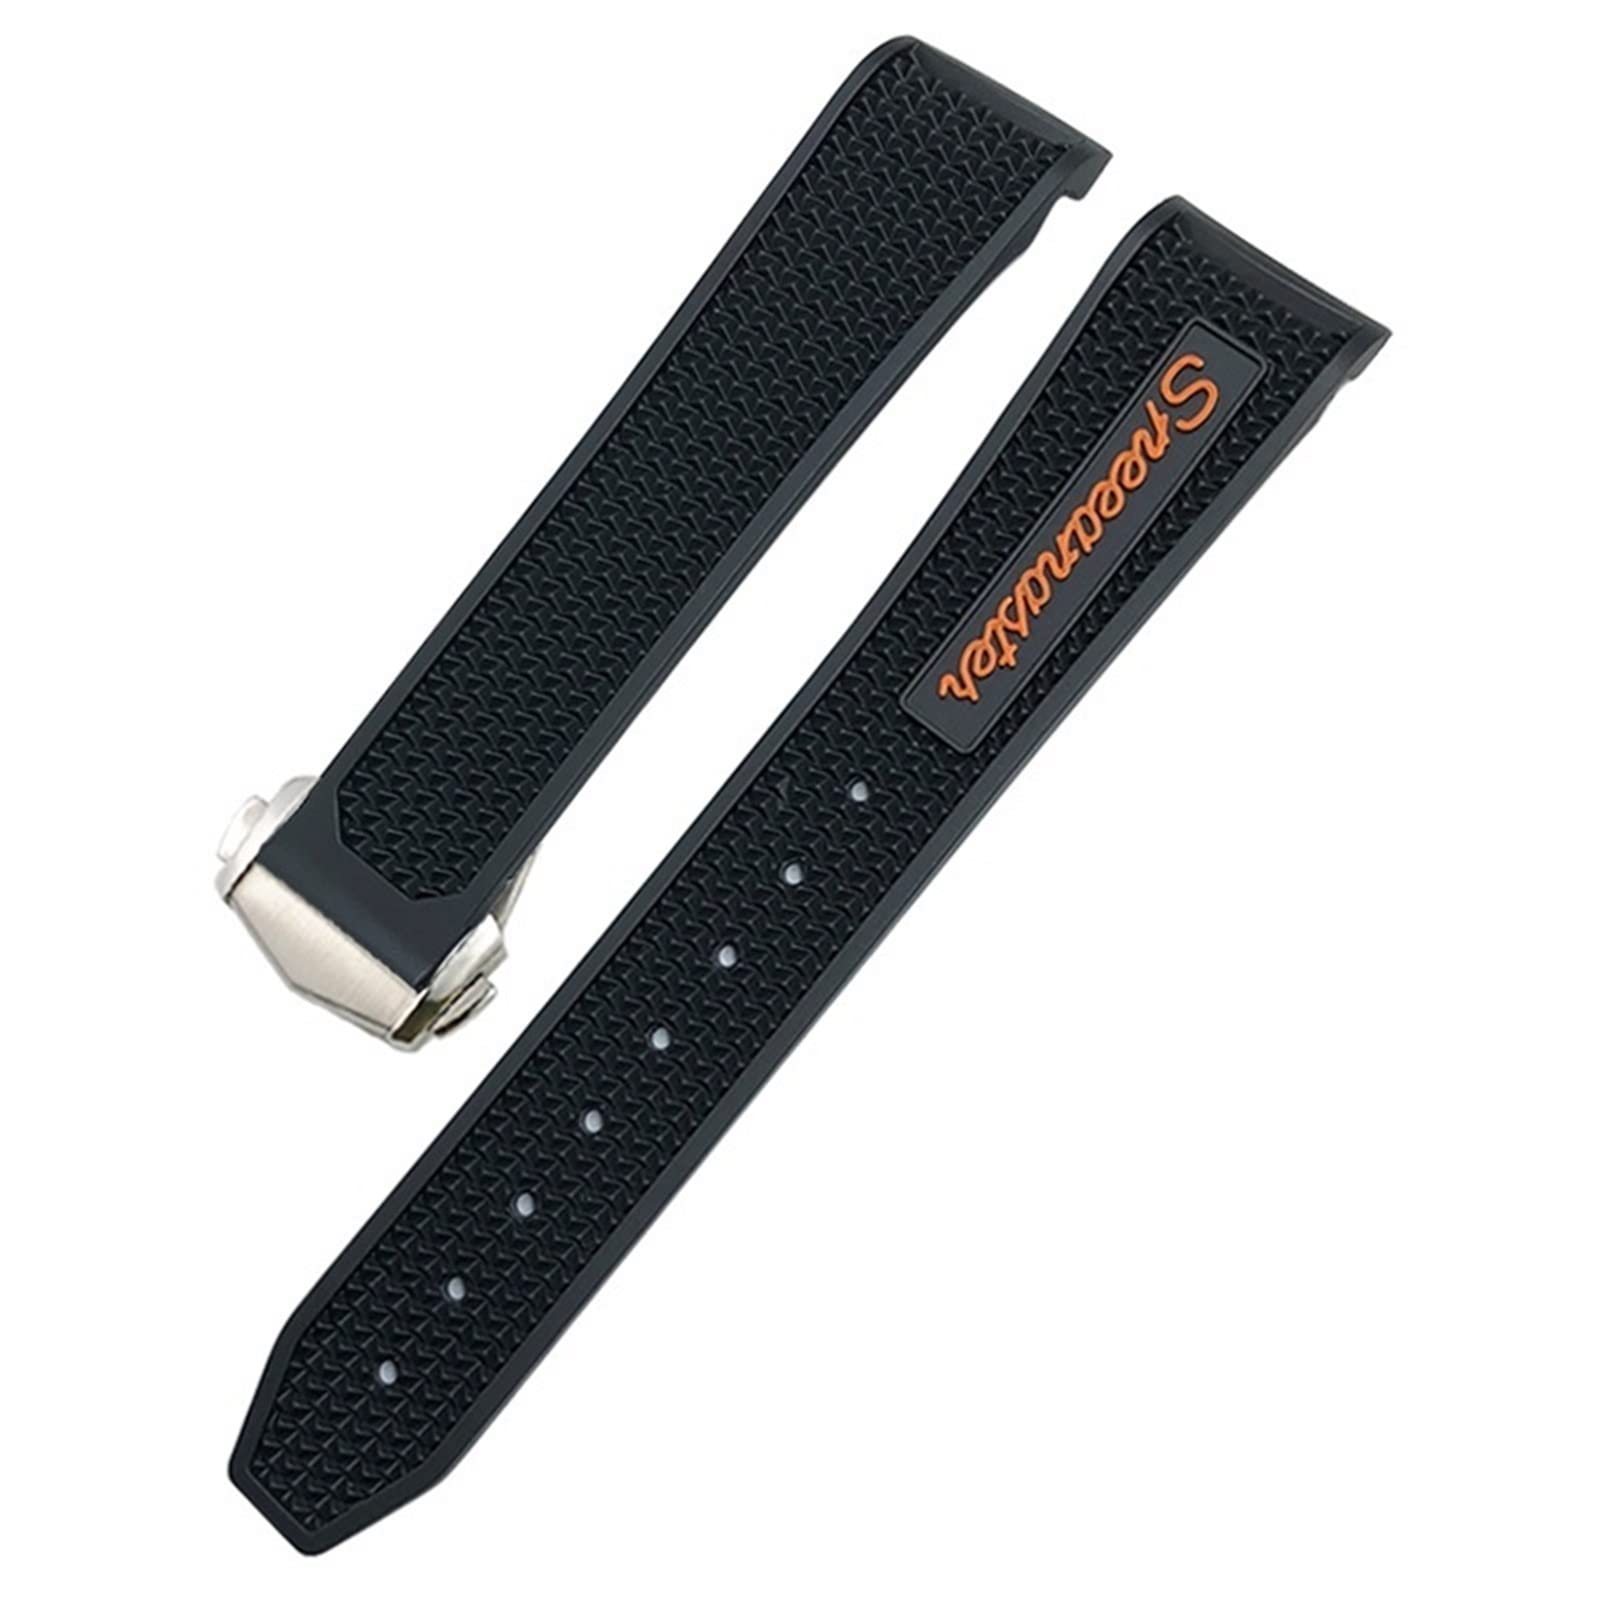 Wscebck 18mm 19mm 20mm 21mm 22mm Rubber Watchband for Omega Sxwatch Moon Watch Speedmaster Seamaster AT150 Tag Heuer Soft Strap (Color : Black Orange Pointy, Size : 20mm)